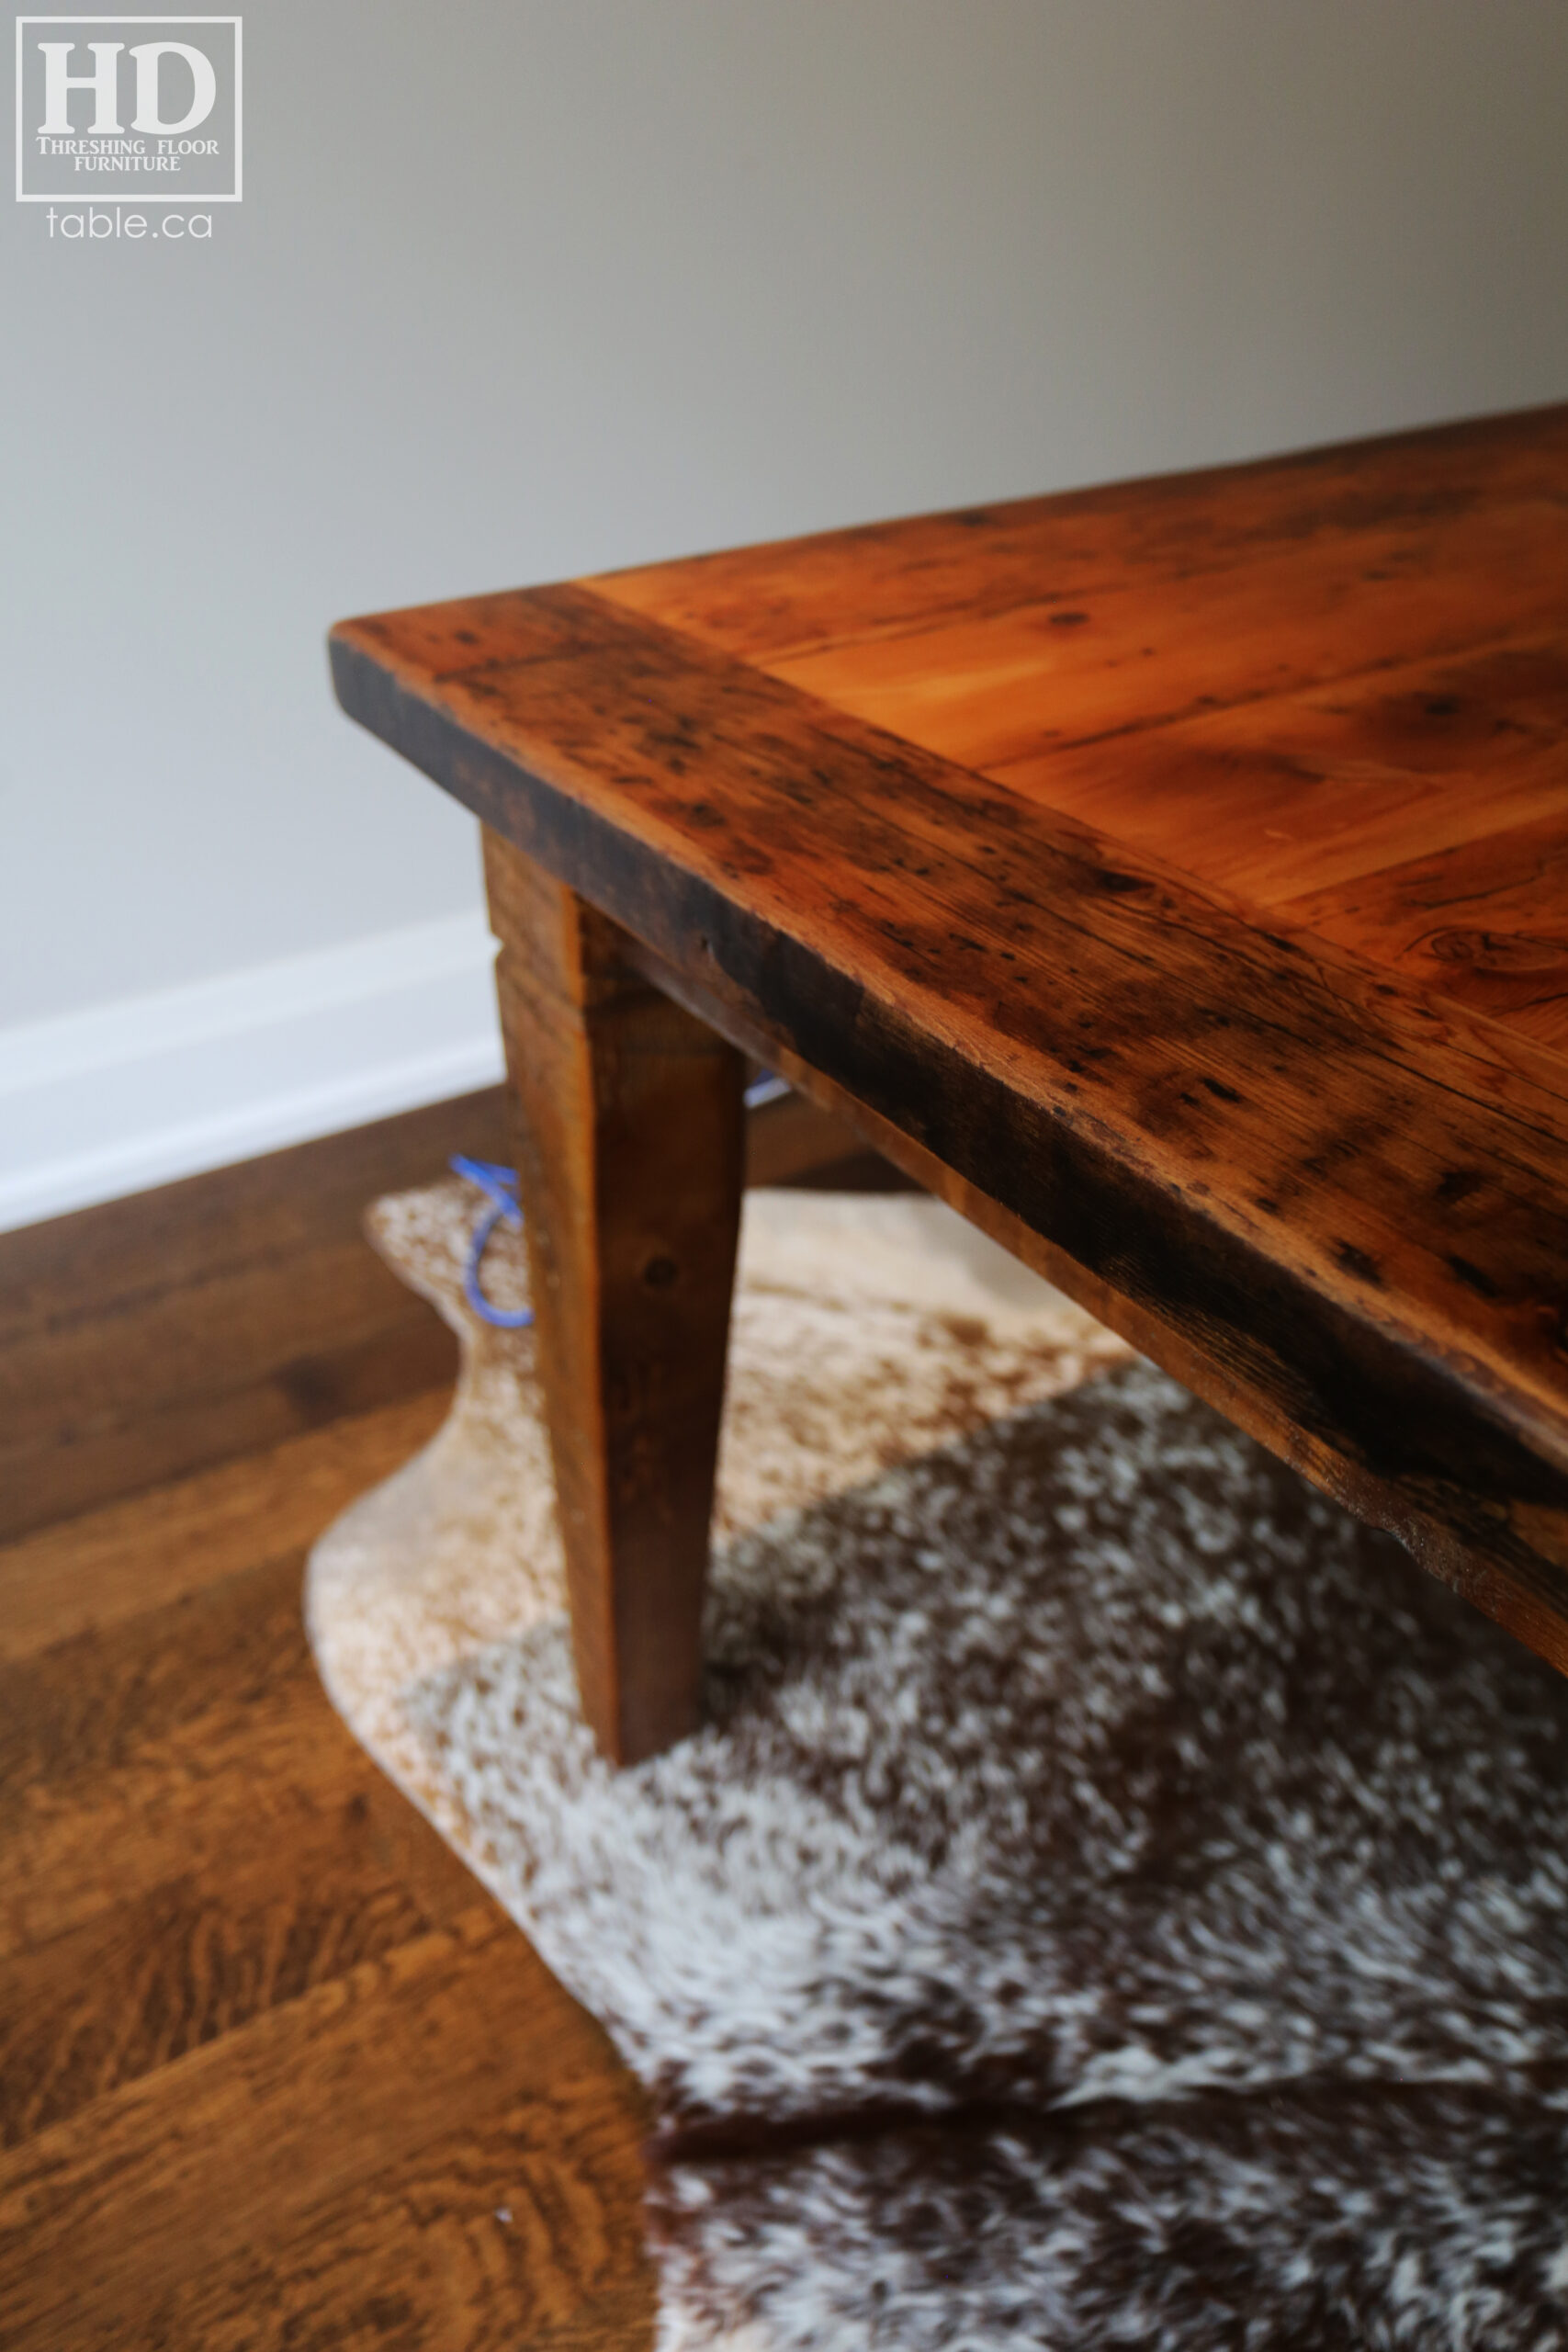 Reclaimed Wood Harvest Table made from Ontario Barnwood by HD Threshing Floor Furniture / www.table.ca 